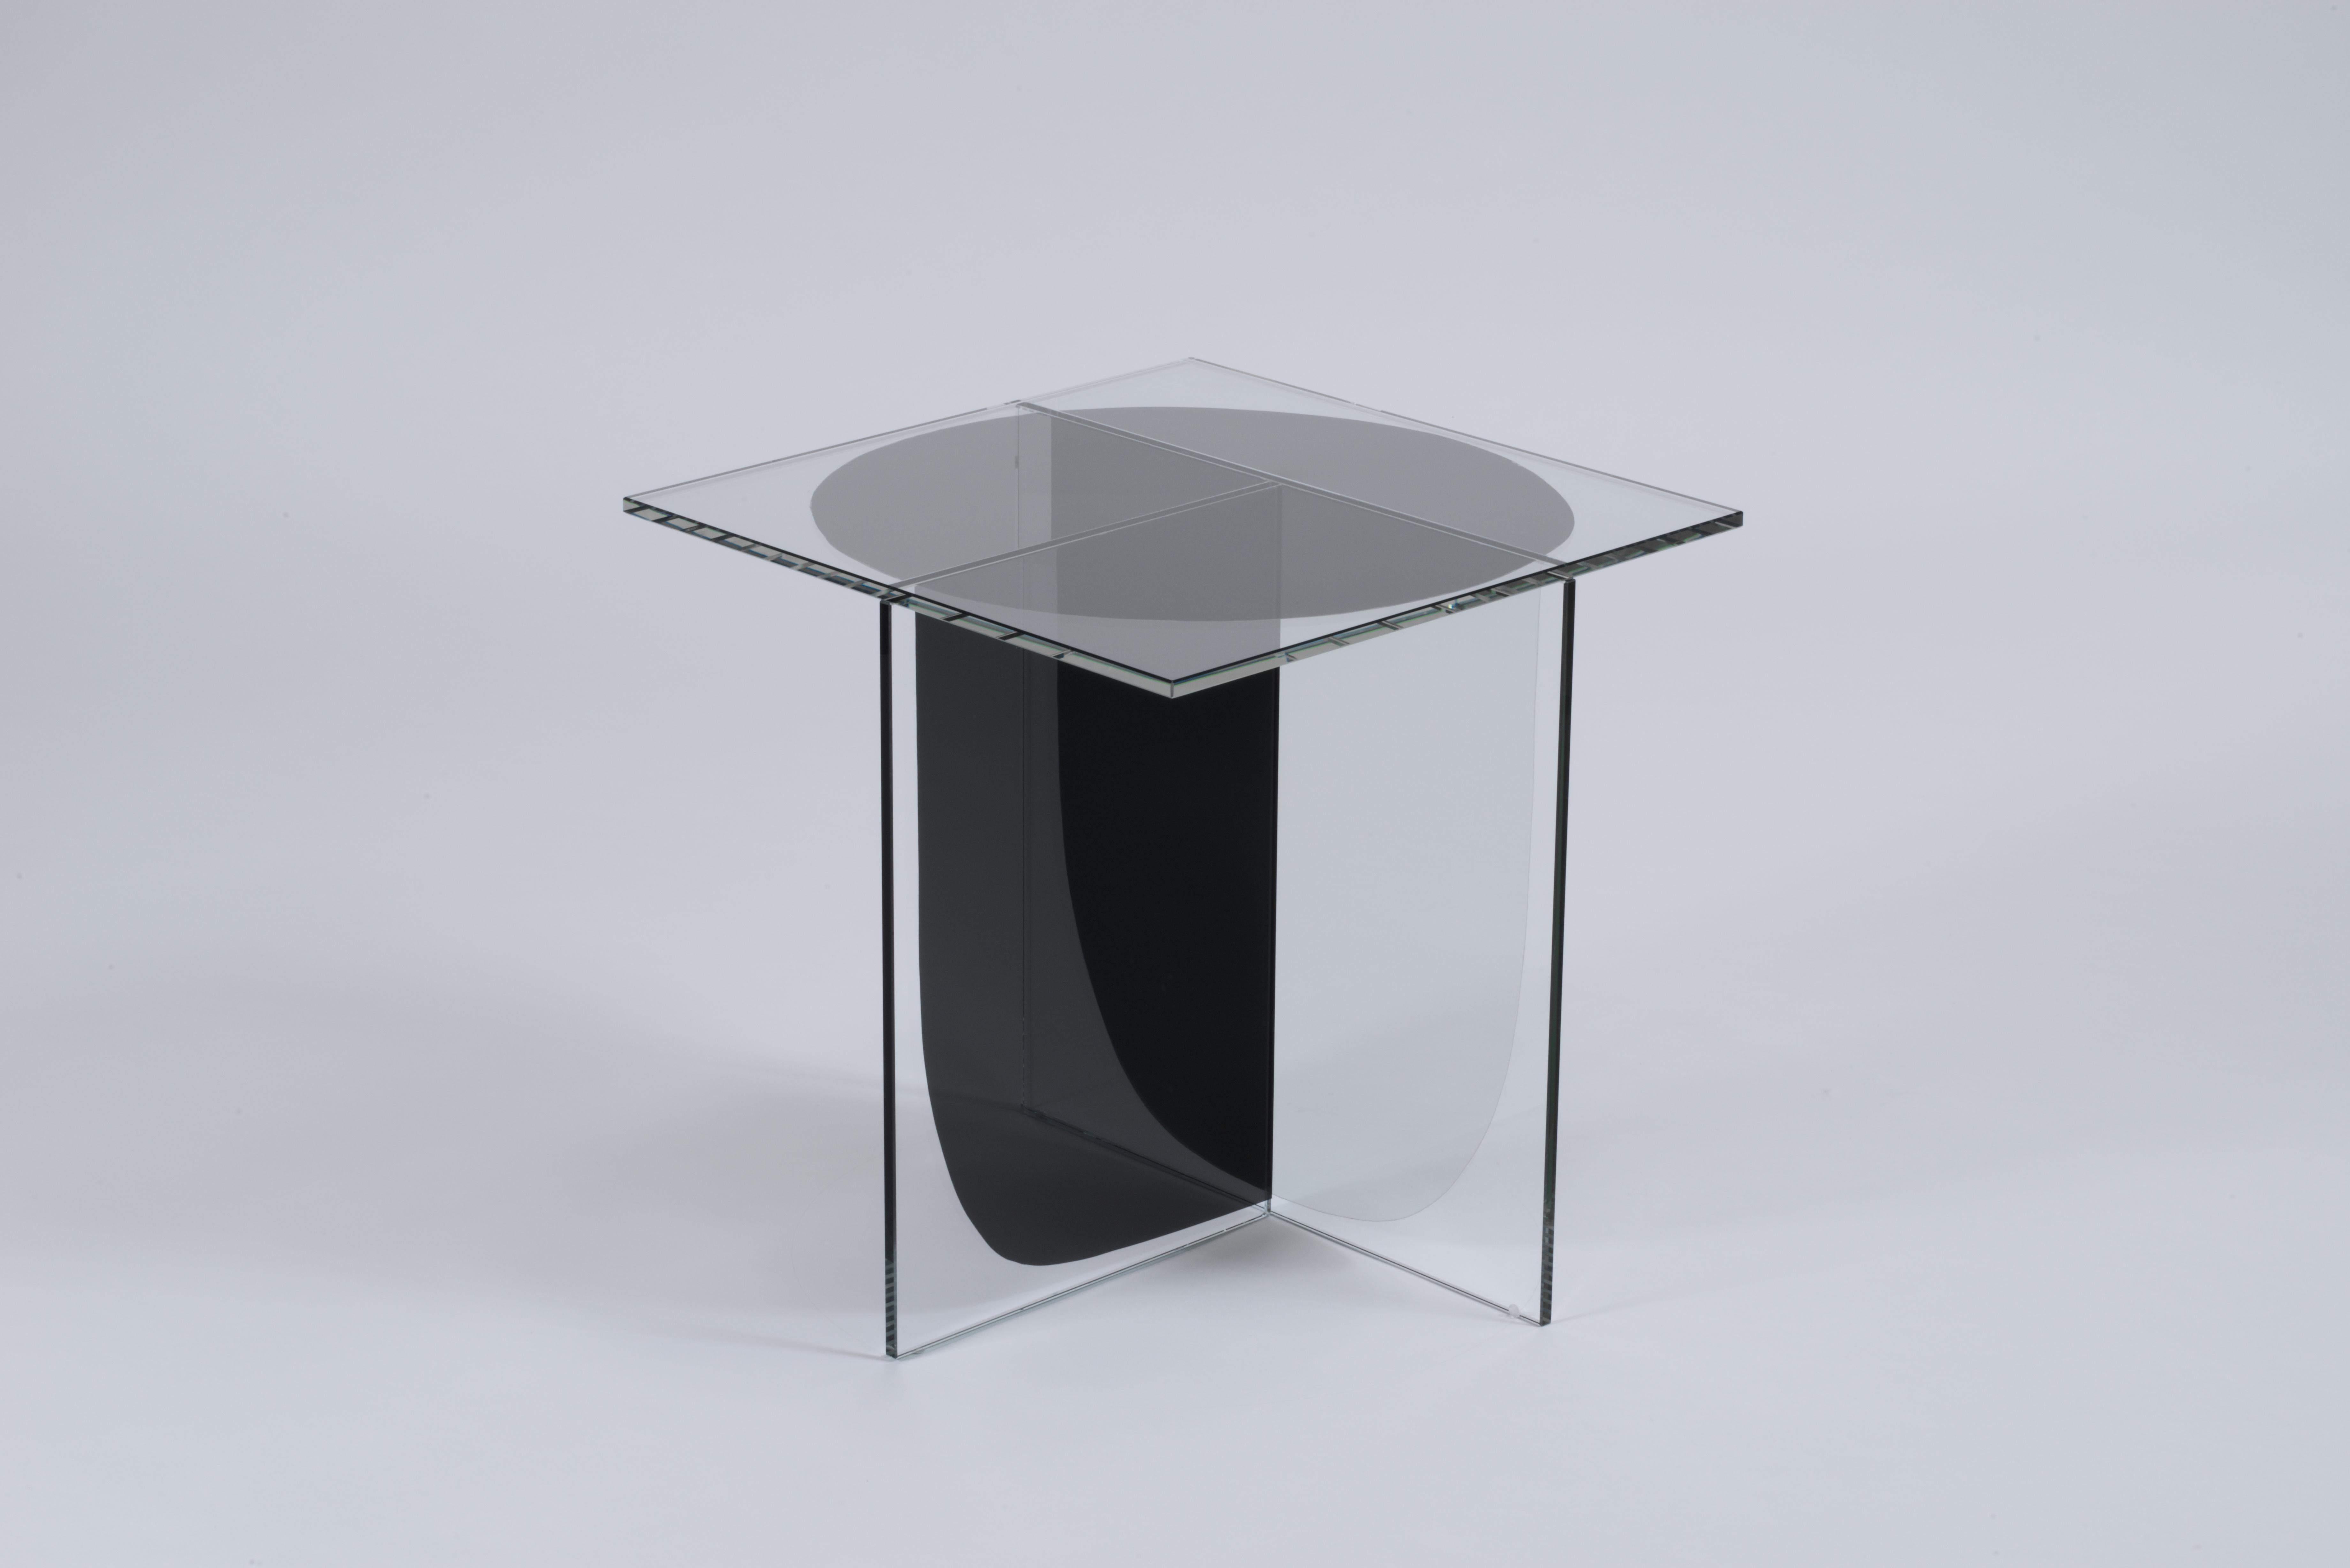 Bipolar coffee table by OS And OOS
Dimensions: 45 x 45 x 46 cm
Materials: glass and flterd laminated
Another option: Large version coffee table: 110 x 45 x 30 
Weight:
Coffee table: 27 kg

Studio OS and OOS is design studio for small objects to